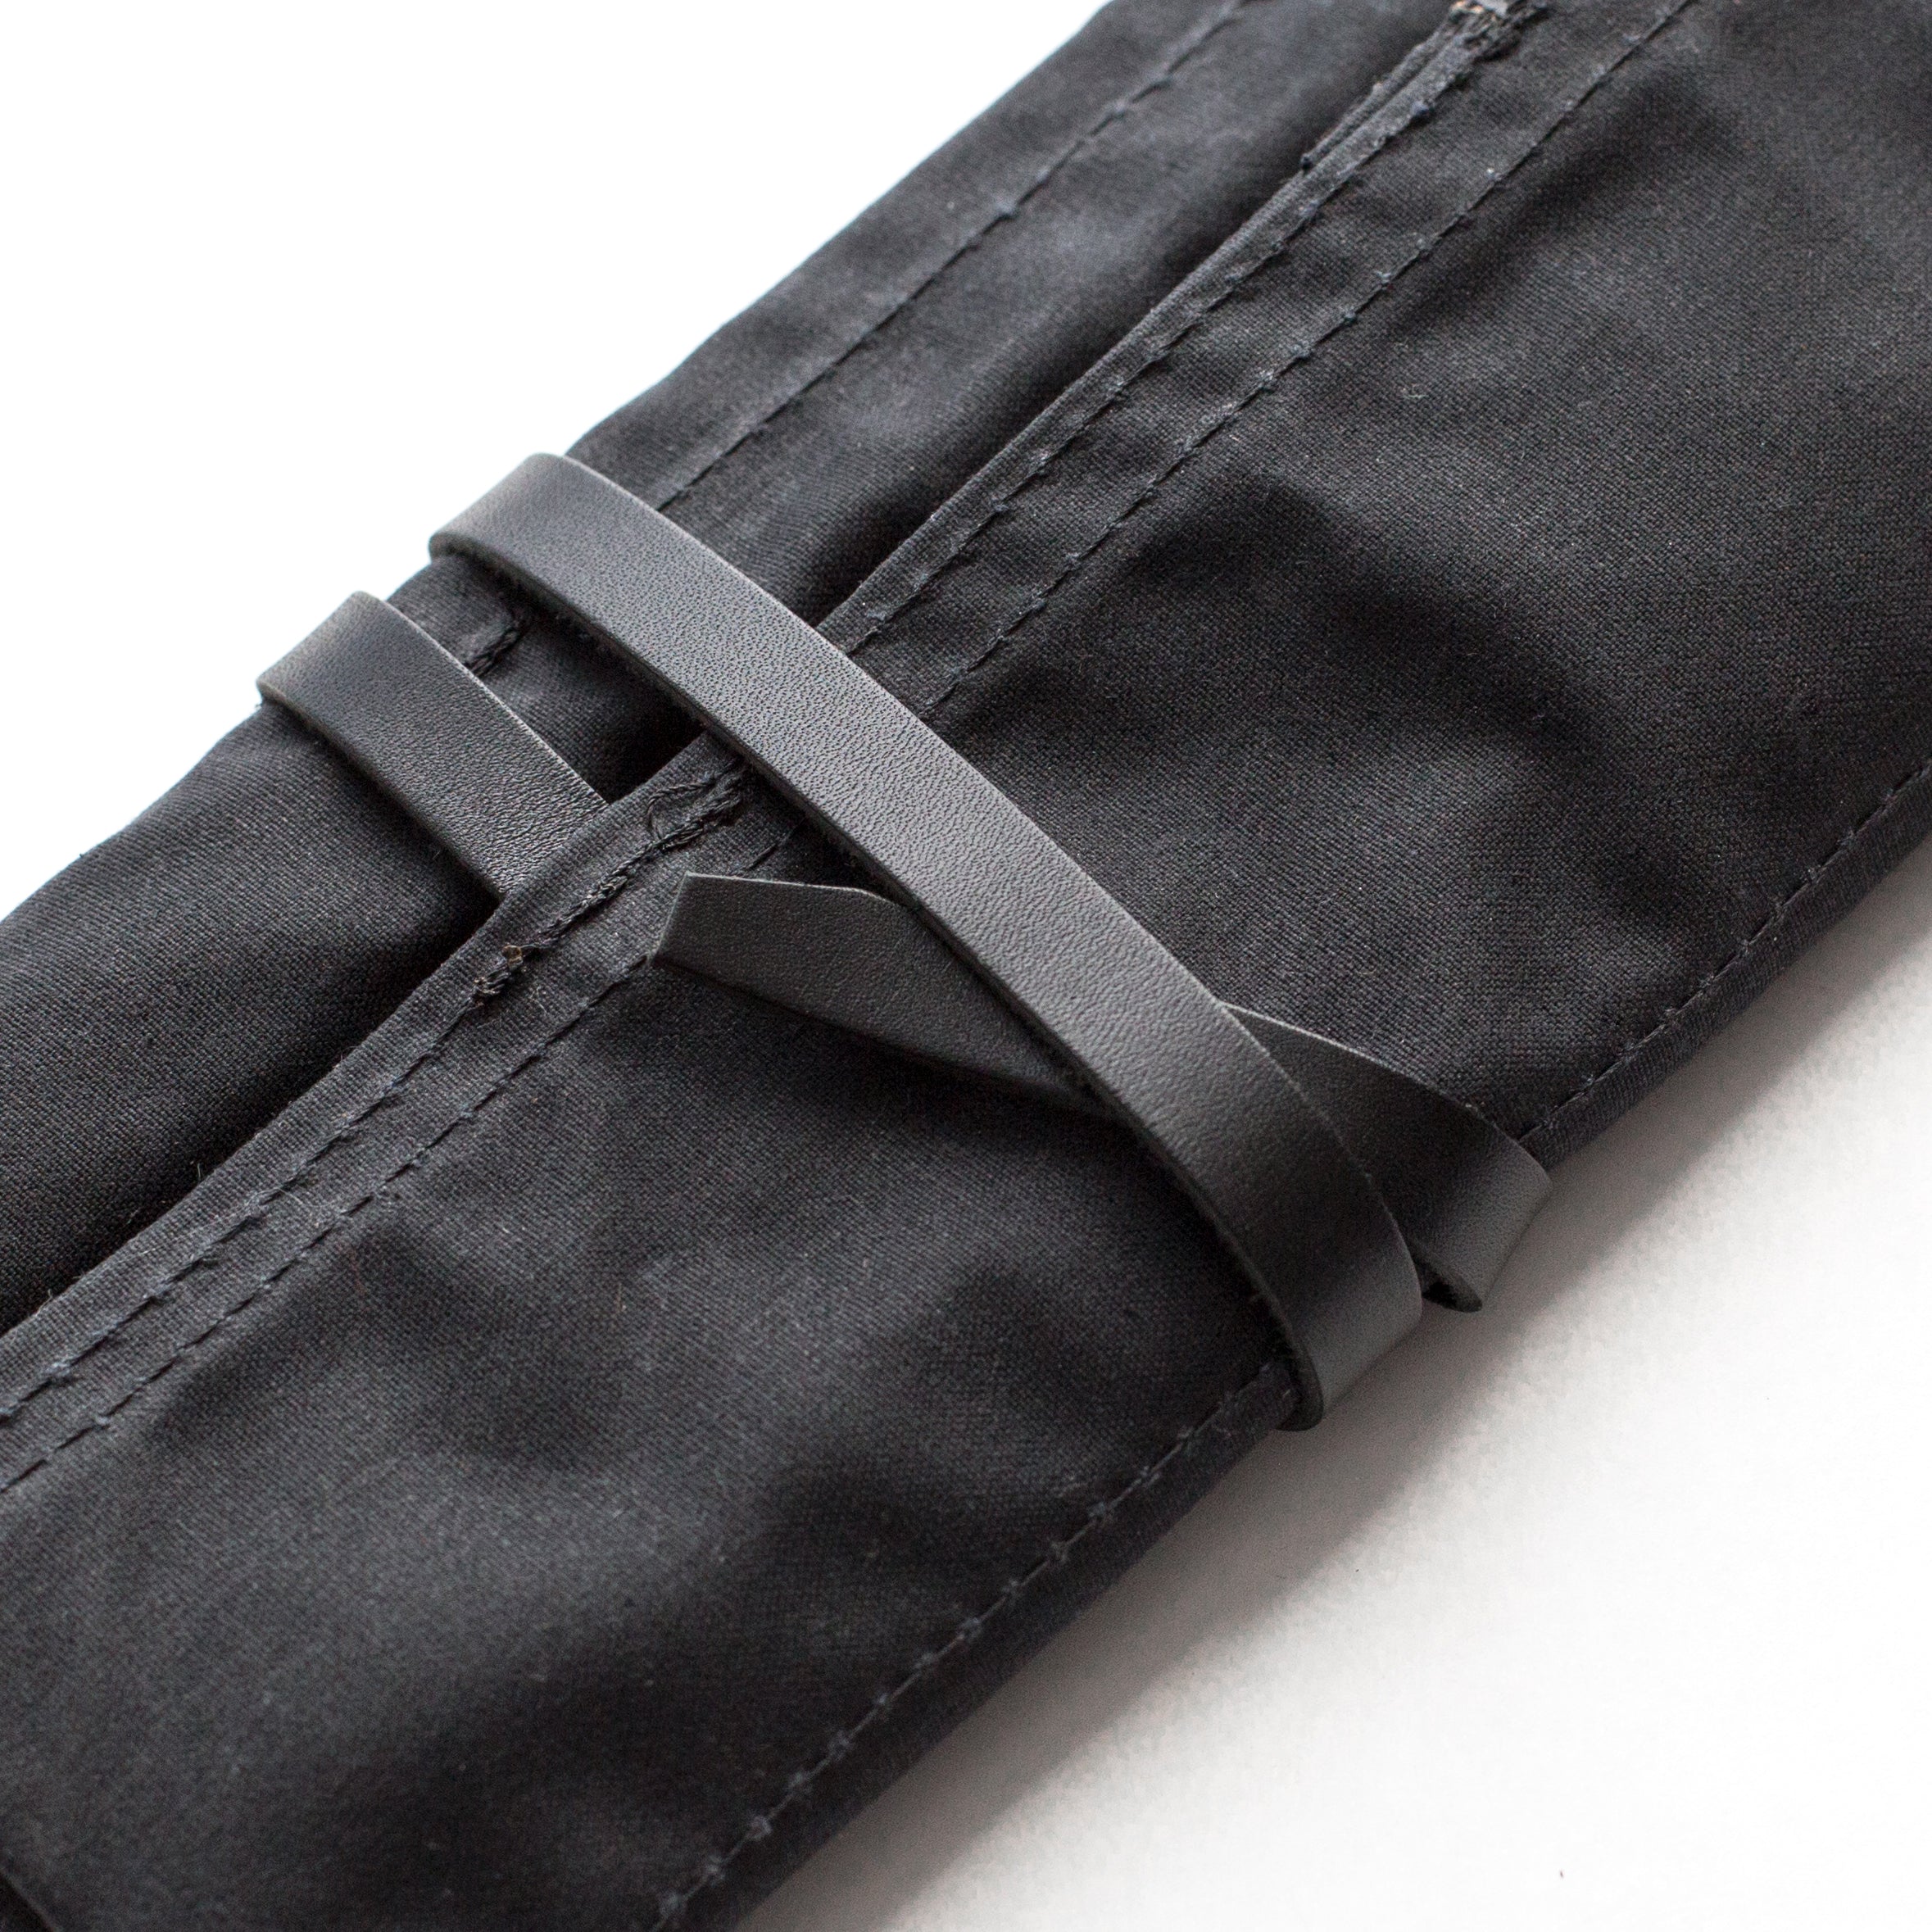 Blackwing Pencil Roll - Carry Your Blackwings in Style